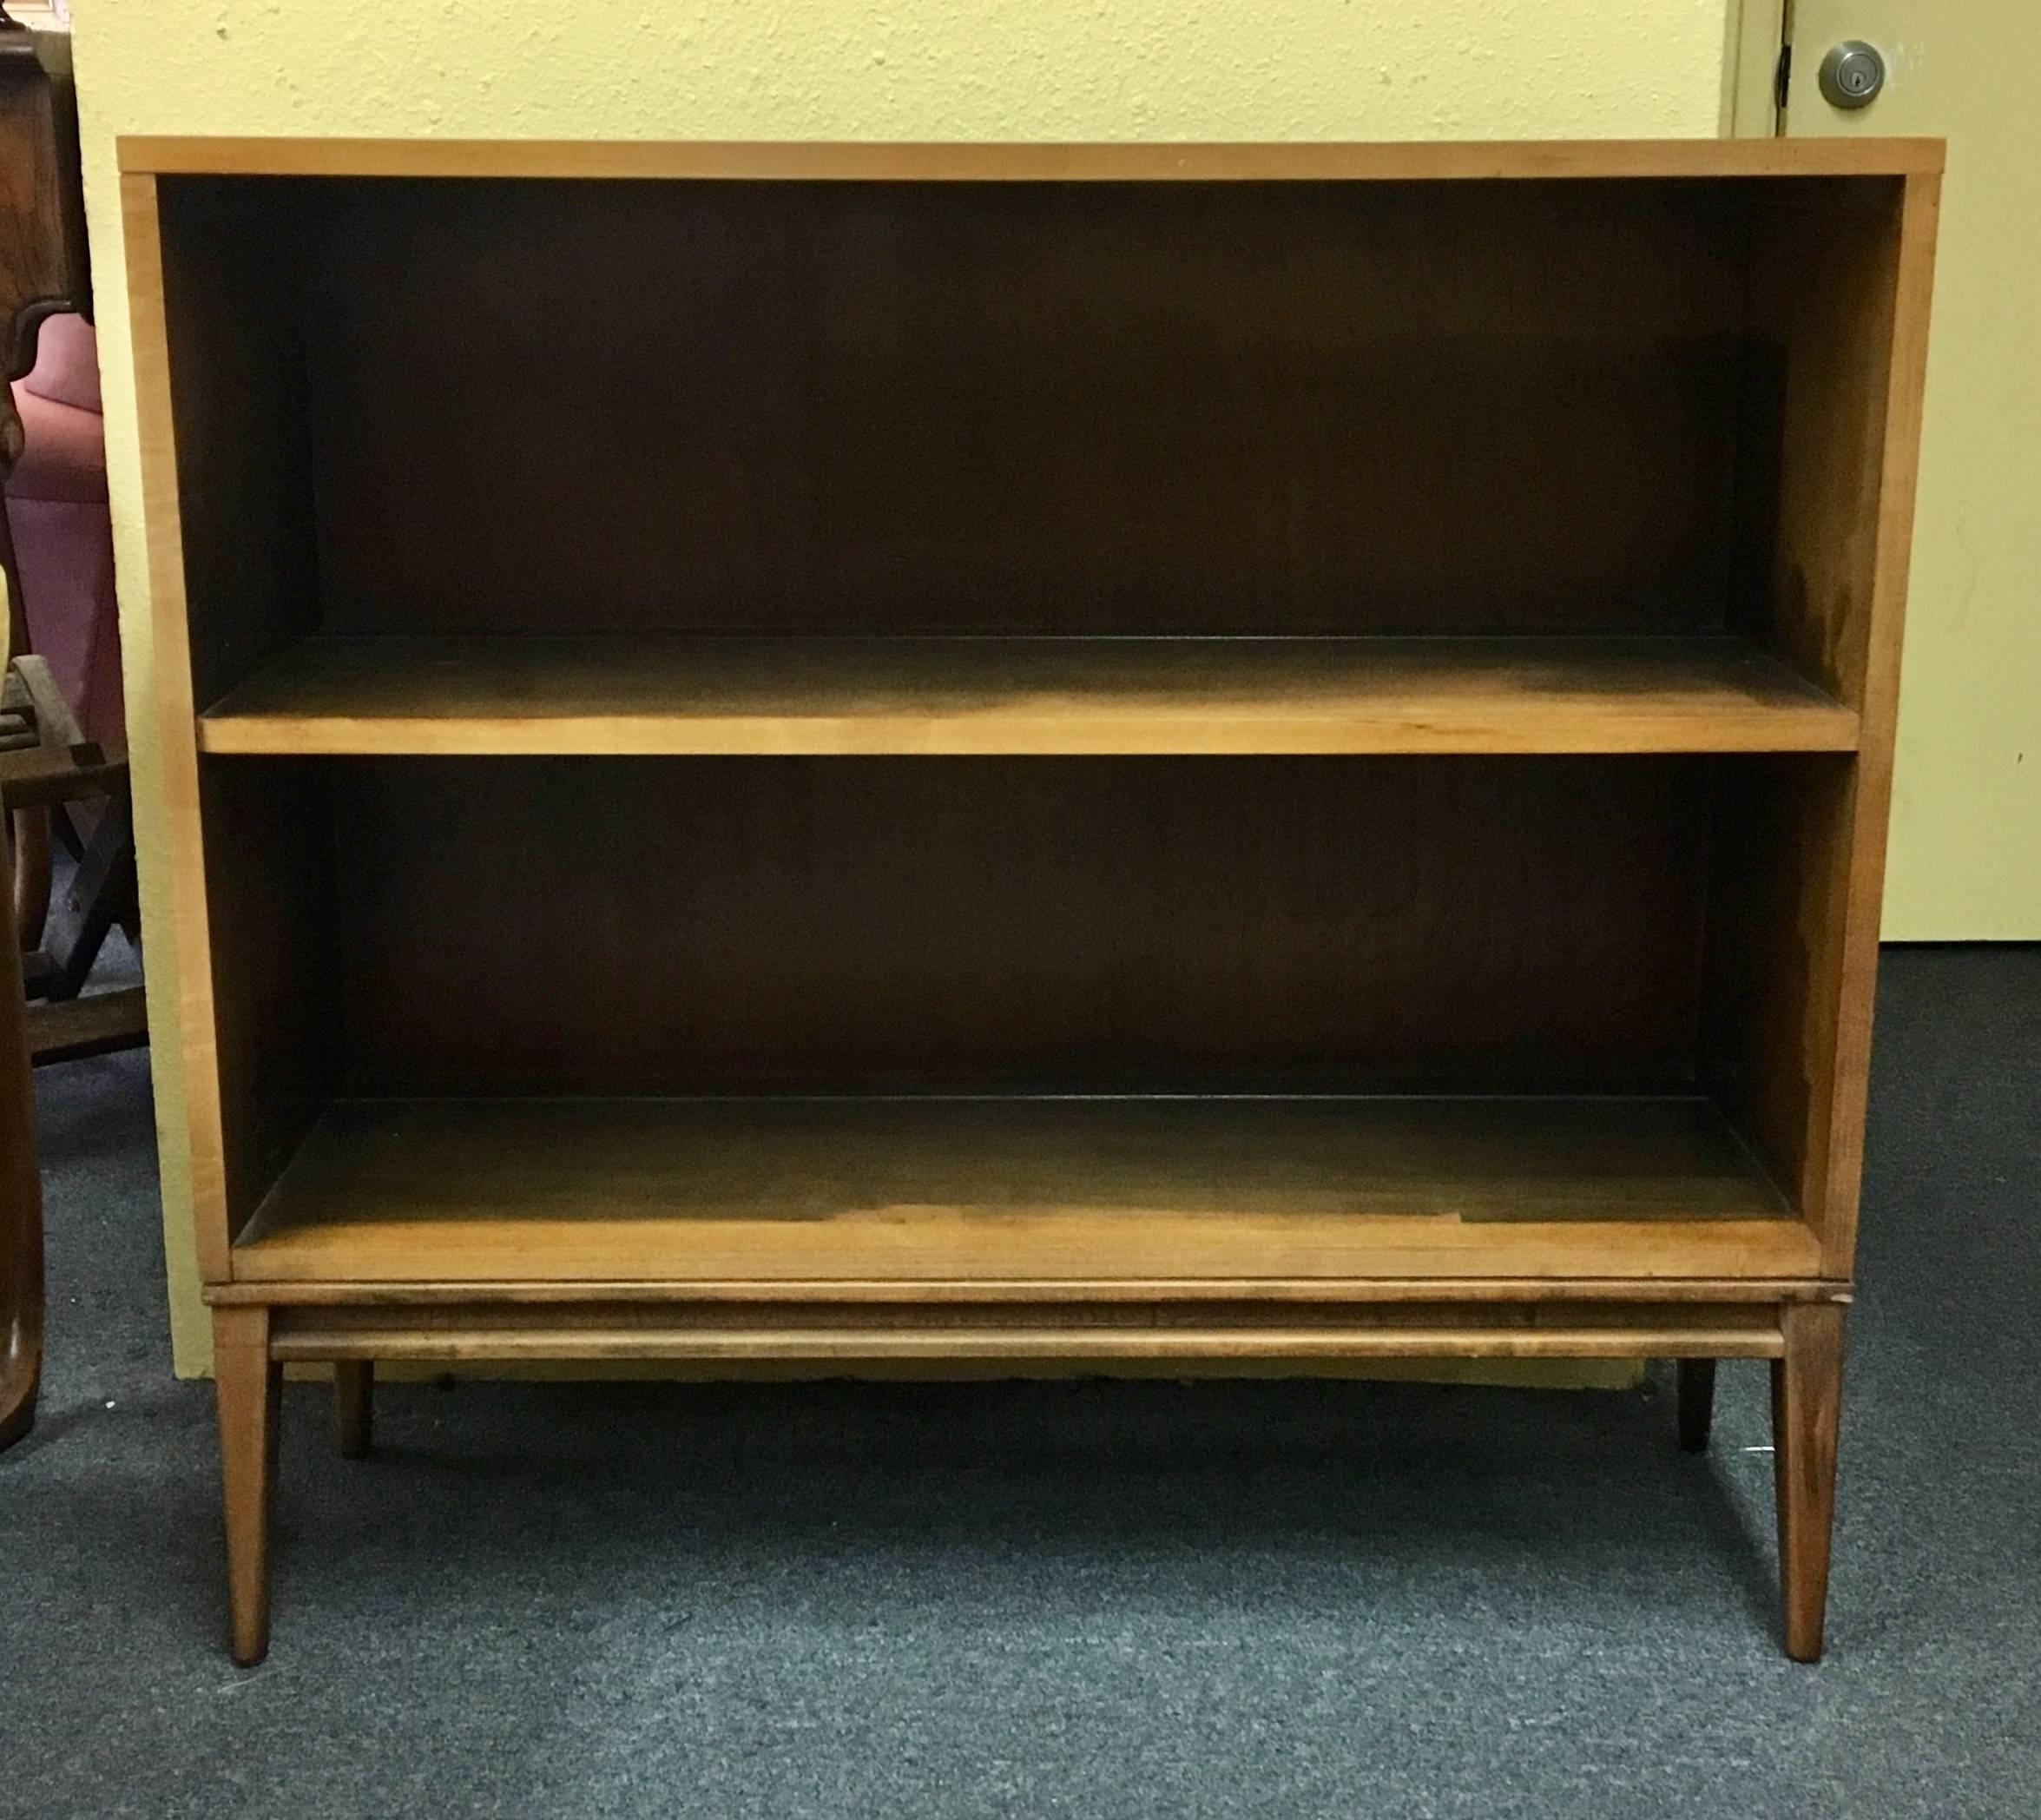 Hard to find matching pair of solid birch bookcases designed by Paul McCobb as part of the planner group, circa 1950s. In original condition with walnut finish, aluminum foil label, and adjustable feet. Overall, very good vintage condition.